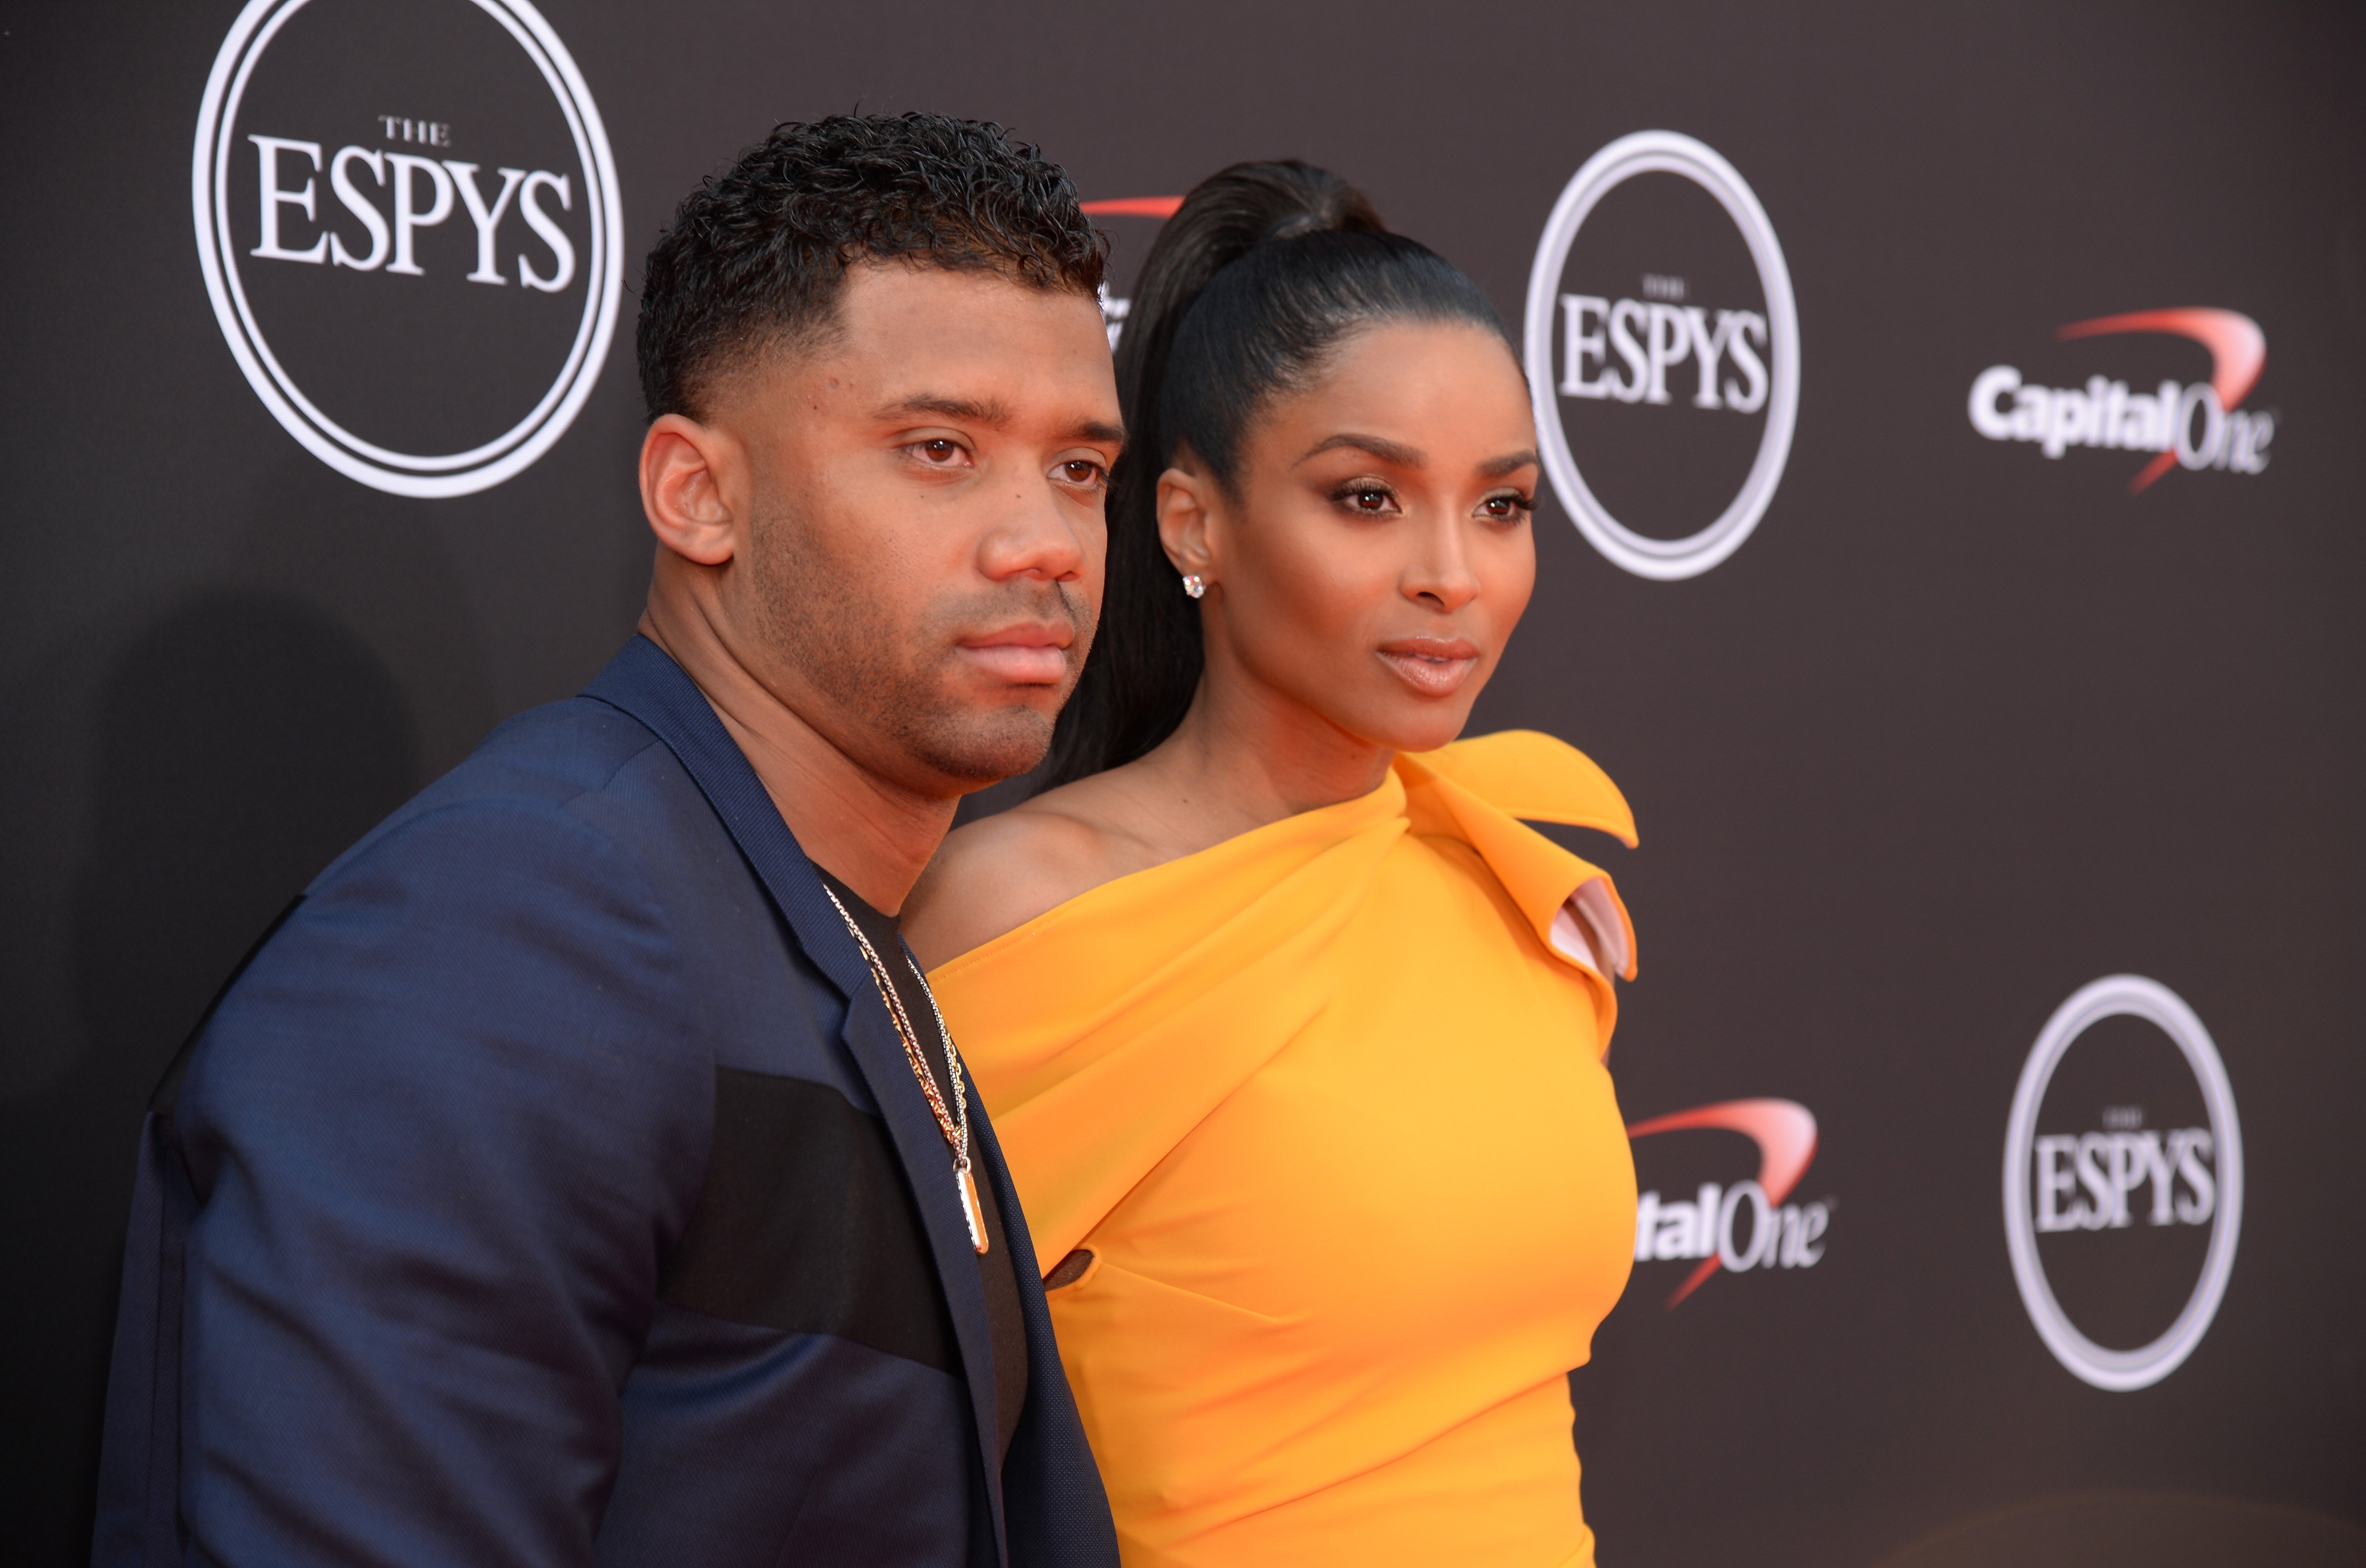 Russell Wilson and Ciara at the 2018 ESPY Awards red carpet. | Photo: Getty Images